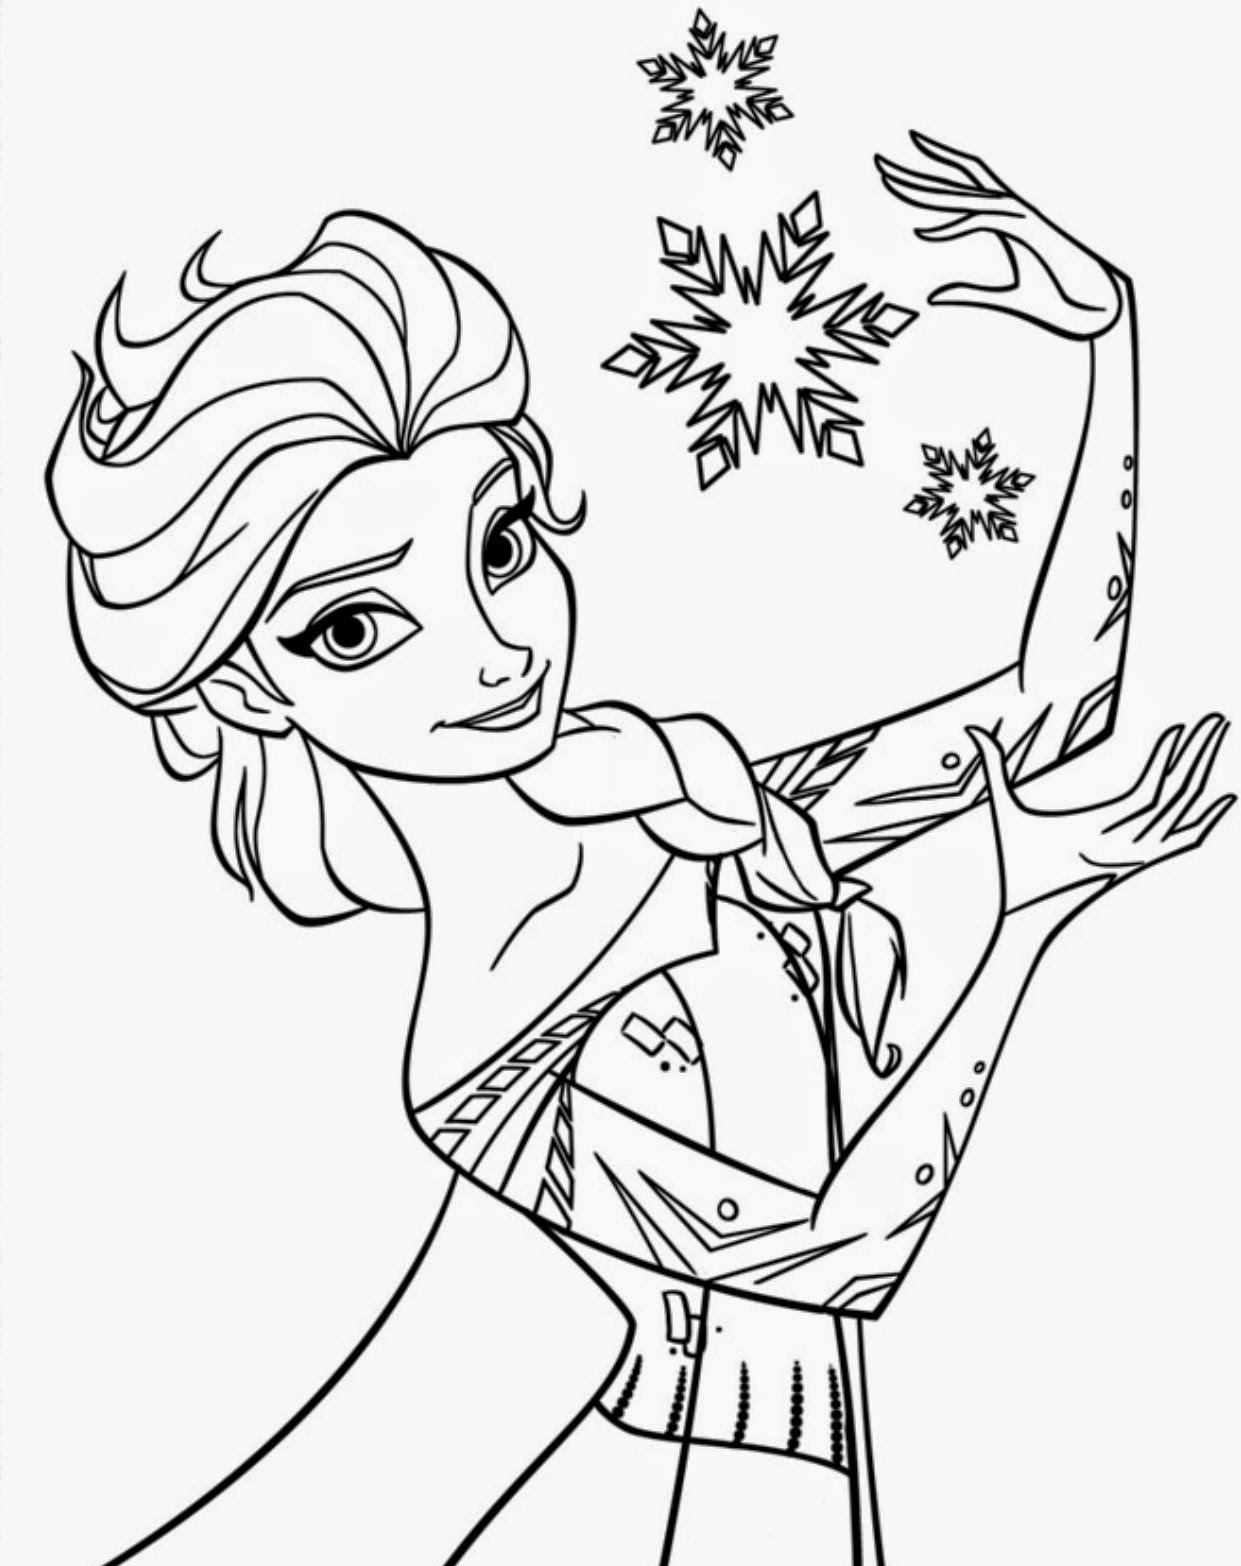 15 Beautiful Disney Frozen Coloring Pages Free Instant Coloring Wallpapers Download Free Images Wallpaper [coloring436.blogspot.com]